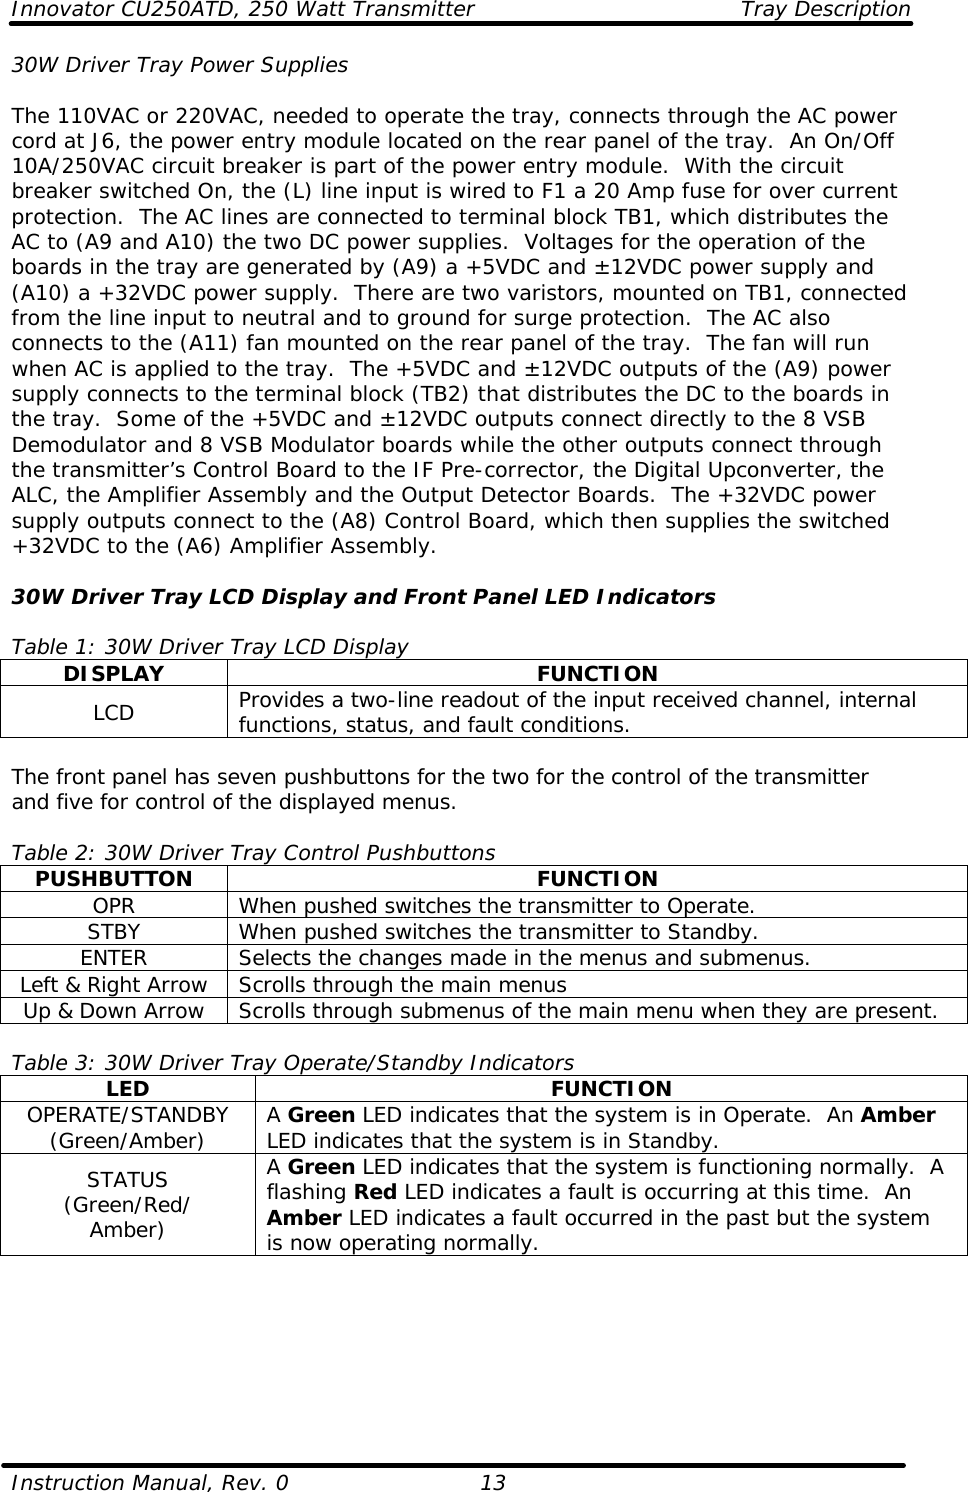 Innovator CU250ATD, 250 Watt Transmitter Tray Description  Instruction Manual, Rev. 0    13 30W Driver Tray Power Supplies  The 110VAC or 220VAC, needed to operate the tray, connects through the AC power cord at J6, the power entry module located on the rear panel of the tray.  An On/Off 10A/250VAC circuit breaker is part of the power entry module.  With the circuit breaker switched On, the (L) line input is wired to F1 a 20 Amp fuse for over current protection.  The AC lines are connected to terminal block TB1, which distributes the AC to (A9 and A10) the two DC power supplies.  Voltages for the operation of the boards in the tray are generated by (A9) a +5VDC and ±12VDC power supply and (A10) a +32VDC power supply.  There are two varistors, mounted on TB1, connected from the line input to neutral and to ground for surge protection.  The AC also connects to the (A11) fan mounted on the rear panel of the tray.  The fan will run when AC is applied to the tray.  The +5VDC and ±12VDC outputs of the (A9) power supply connects to the terminal block (TB2) that distributes the DC to the boards in the tray.  Some of the +5VDC and ±12VDC outputs connect directly to the 8 VSB Demodulator and 8 VSB Modulator boards while the other outputs connect through the transmitter’s Control Board to the IF Pre-corrector, the Digital Upconverter, the ALC, the Amplifier Assembly and the Output Detector Boards.  The +32VDC power supply outputs connect to the (A8) Control Board, which then supplies the switched +32VDC to the (A6) Amplifier Assembly.  30W Driver Tray LCD Display and Front Panel LED Indicators  Table 1: 30W Driver Tray LCD Display DISPLAY FUNCTION LCD Provides a two-line readout of the input received channel, internal functions, status, and fault conditions.  The front panel has seven pushbuttons for the two for the control of the transmitter and five for control of the displayed menus.  Table 2: 30W Driver Tray Control Pushbuttons PUSHBUTTON FUNCTION OPR When pushed switches the transmitter to Operate. STBY When pushed switches the transmitter to Standby. ENTER Selects the changes made in the menus and submenus. Left &amp; Right Arrow Scrolls through the main menus Up &amp; Down Arrow Scrolls through submenus of the main menu when they are present.  Table 3: 30W Driver Tray Operate/Standby Indicators LED FUNCTION OPERATE/STANDBY (Green/Amber) A Green LED indicates that the system is in Operate.  An Amber LED indicates that the system is in Standby. STATUS (Green/Red/ Amber) A Green LED indicates that the system is functioning normally.  A flashing Red LED indicates a fault is occurring at this time.  An Amber LED indicates a fault occurred in the past but the system is now operating normally.  